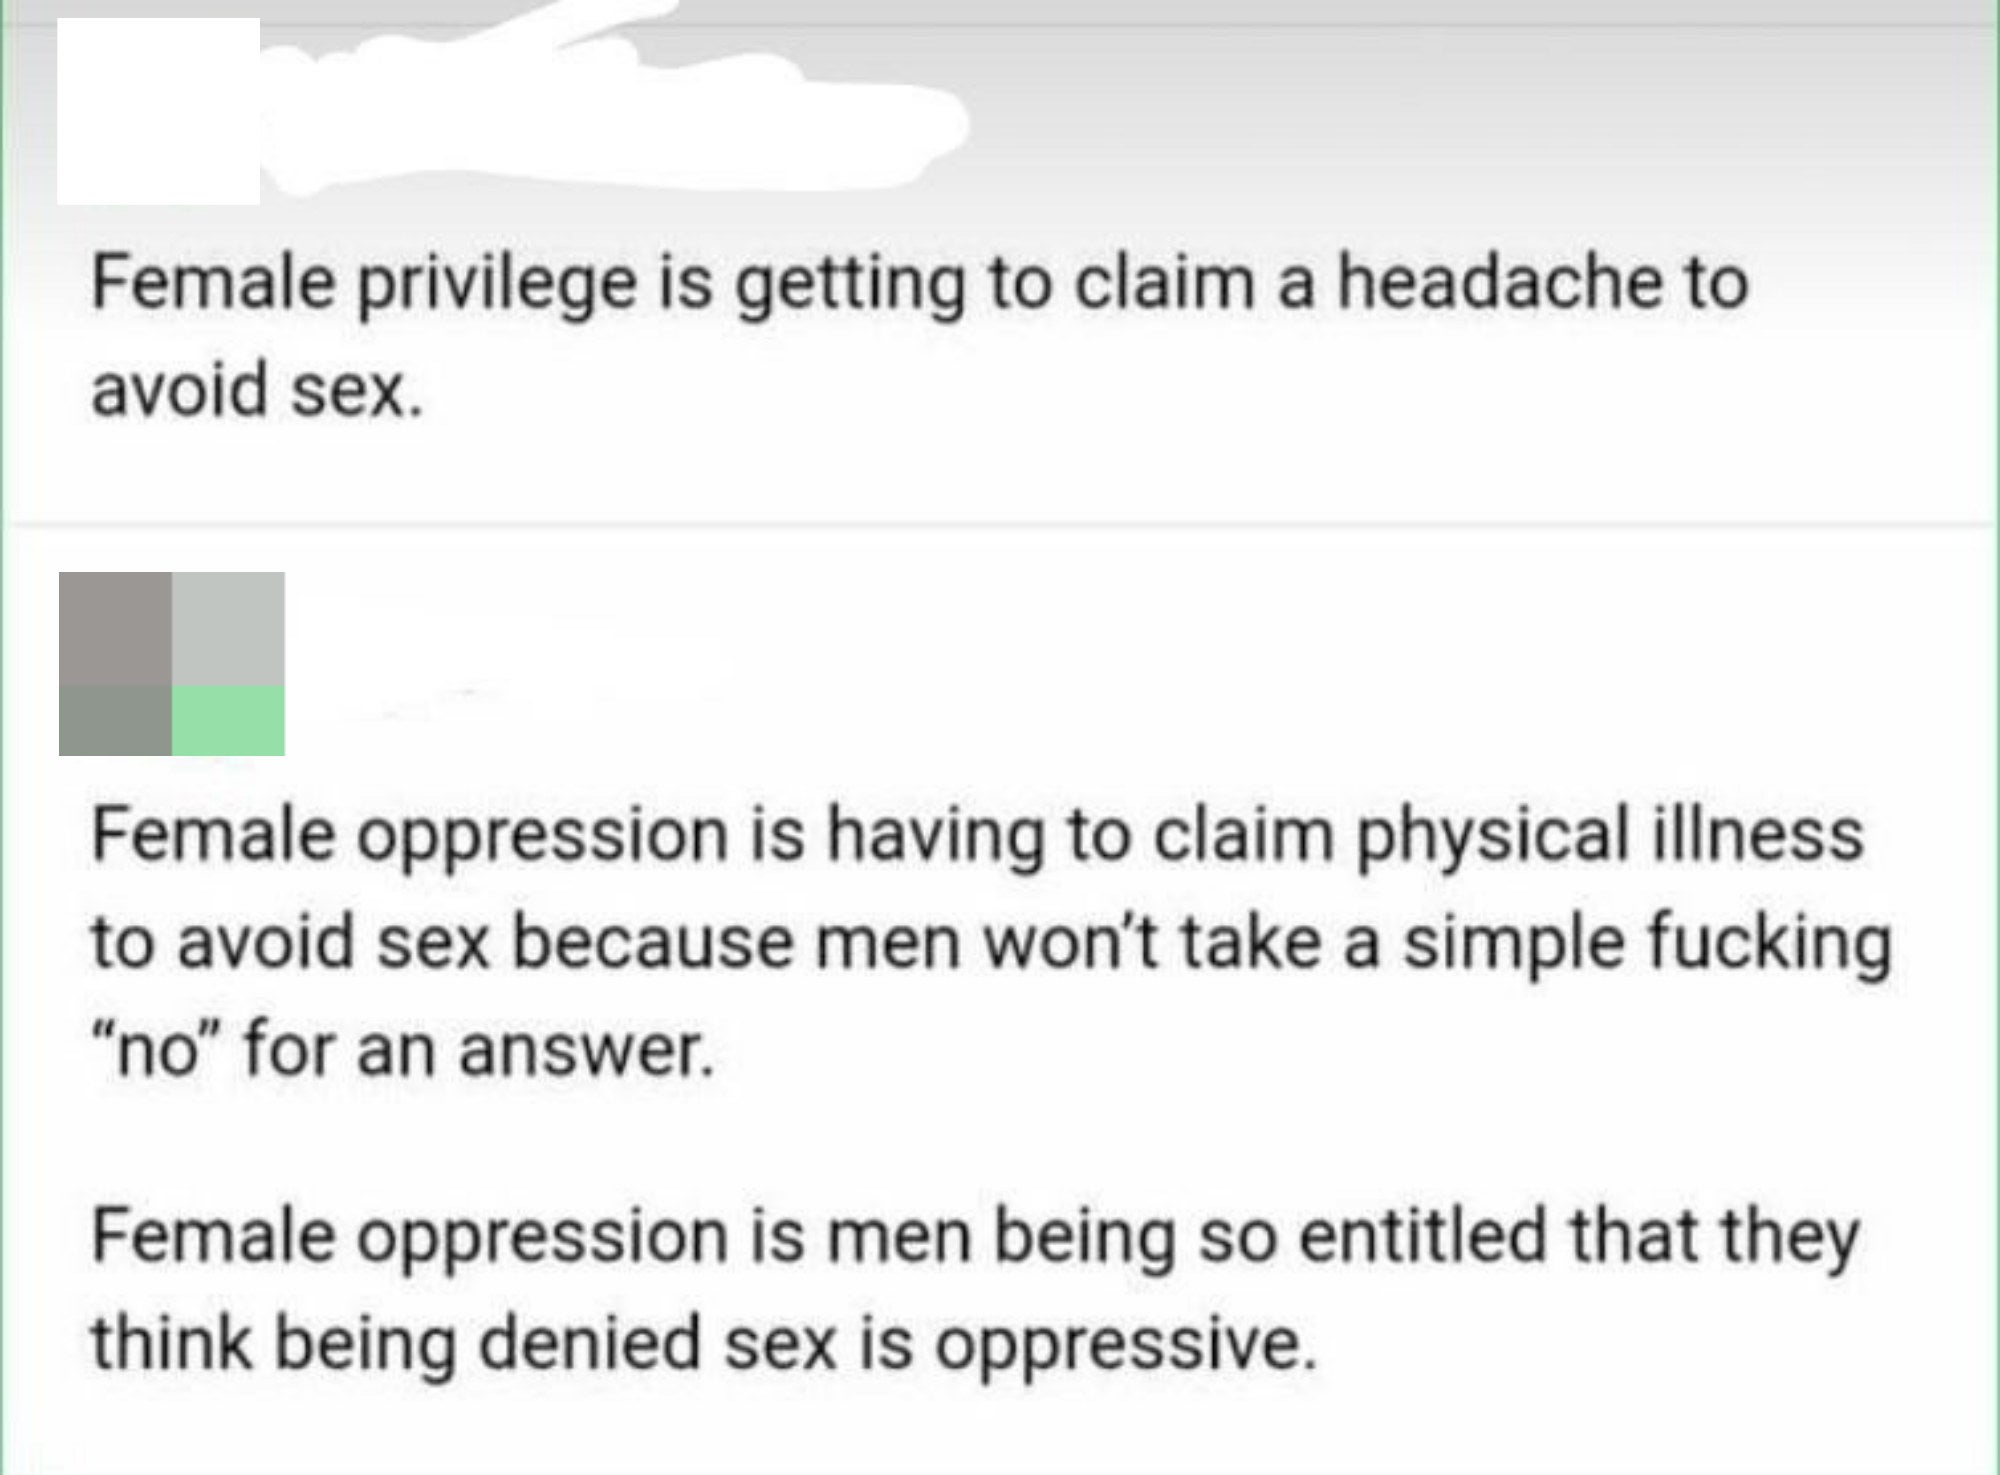 &quot;Female oppression is men being so entitled that they think being denied sex is oppressive.&quot;